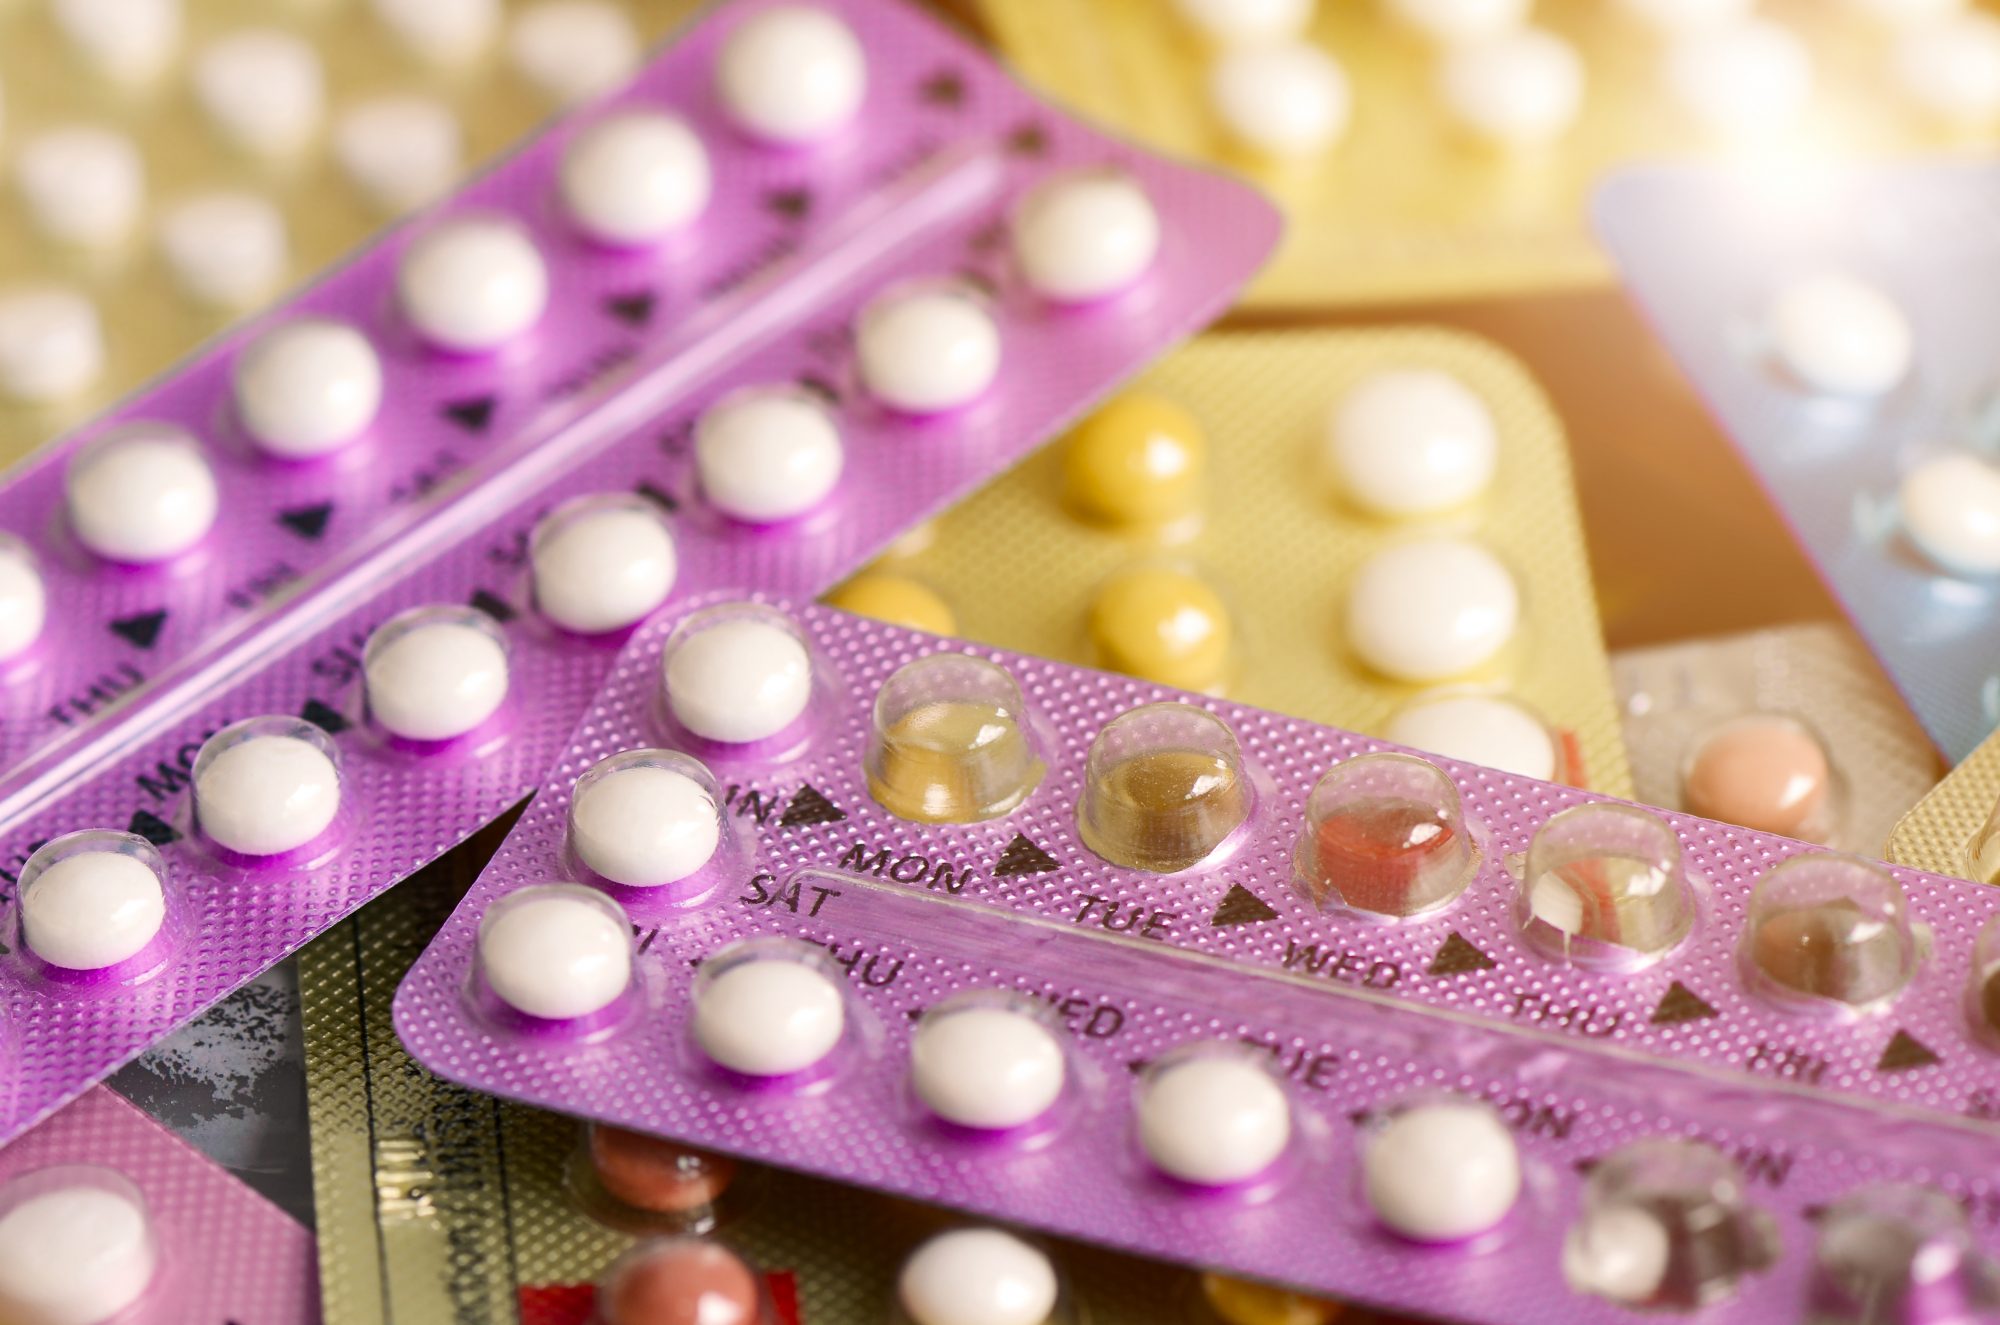 contraception side effects, the pill